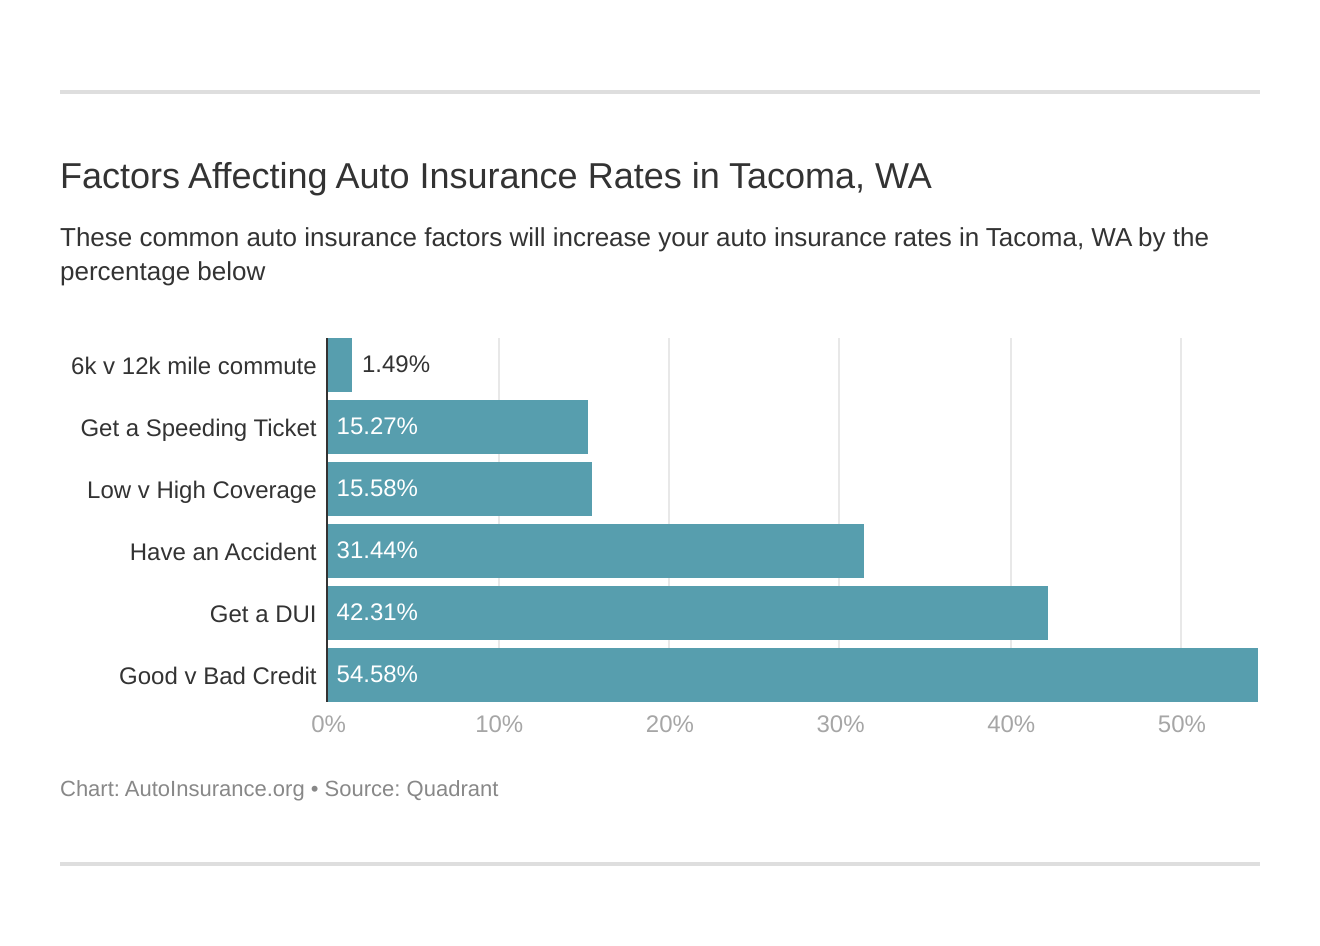 Factors Affecting Auto Insurance Rates in Tacoma, WA